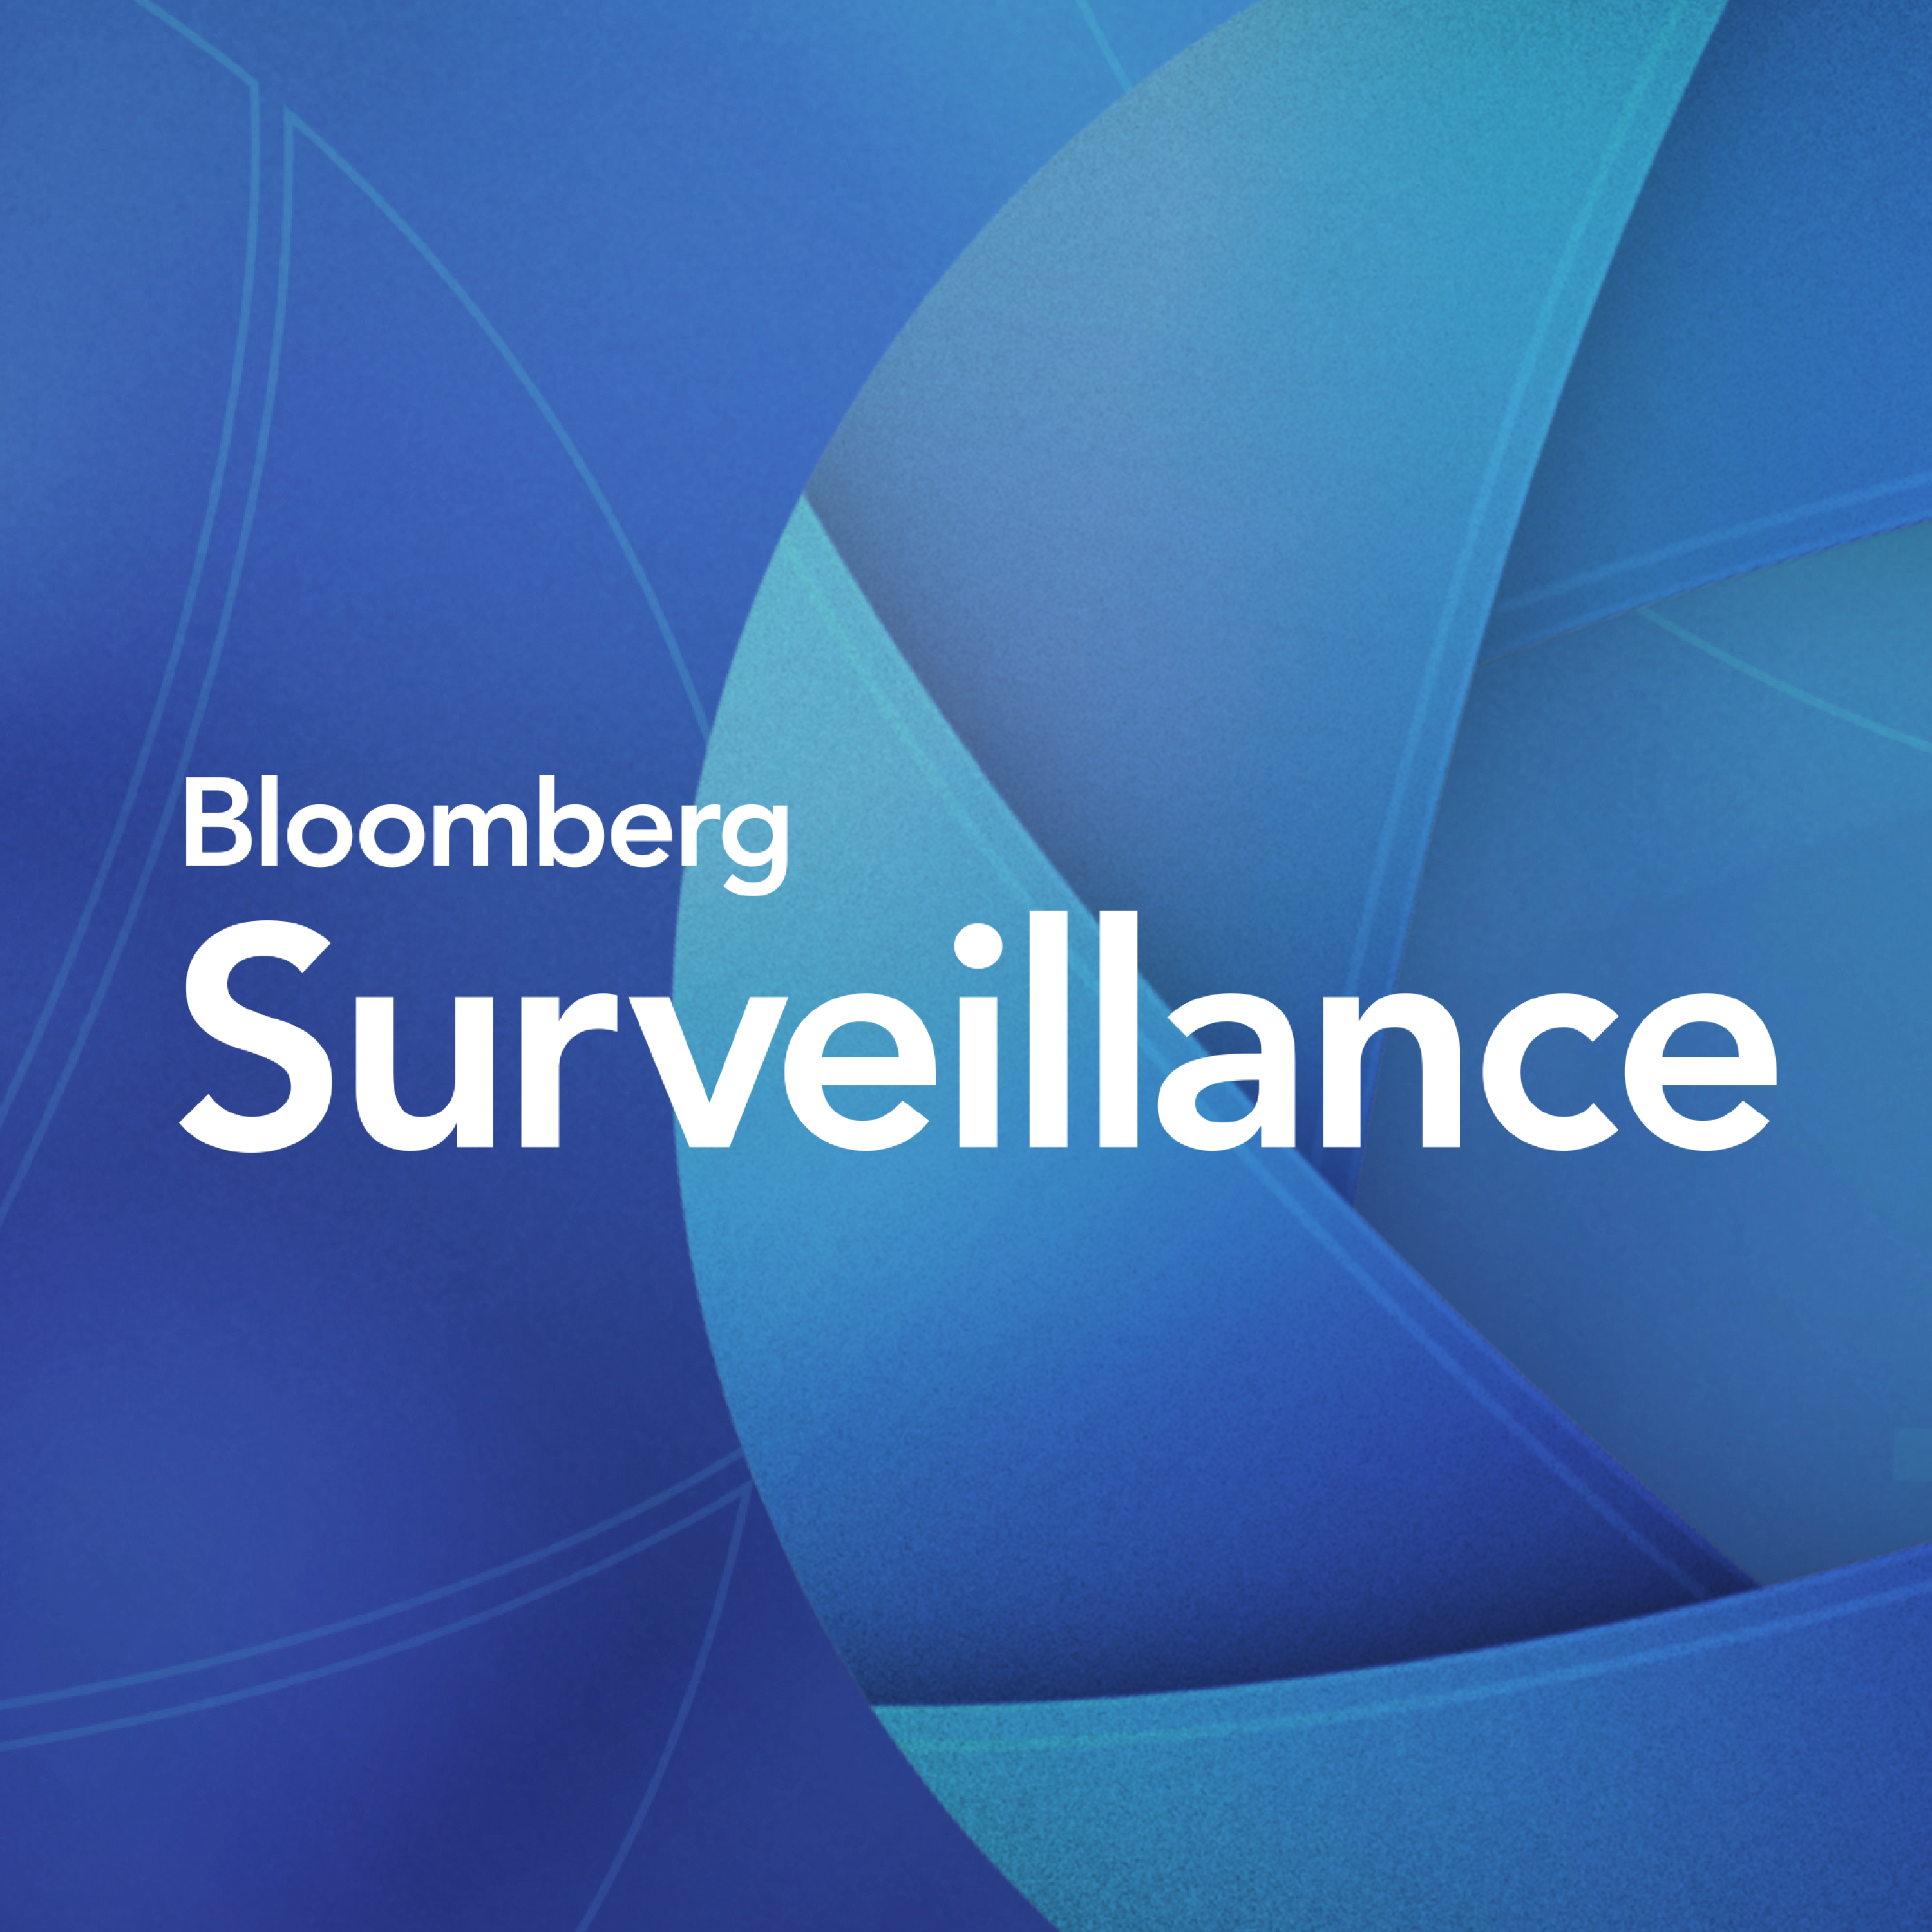 Surveillance: Banks Are Relatively More Resilient, Mayo Says